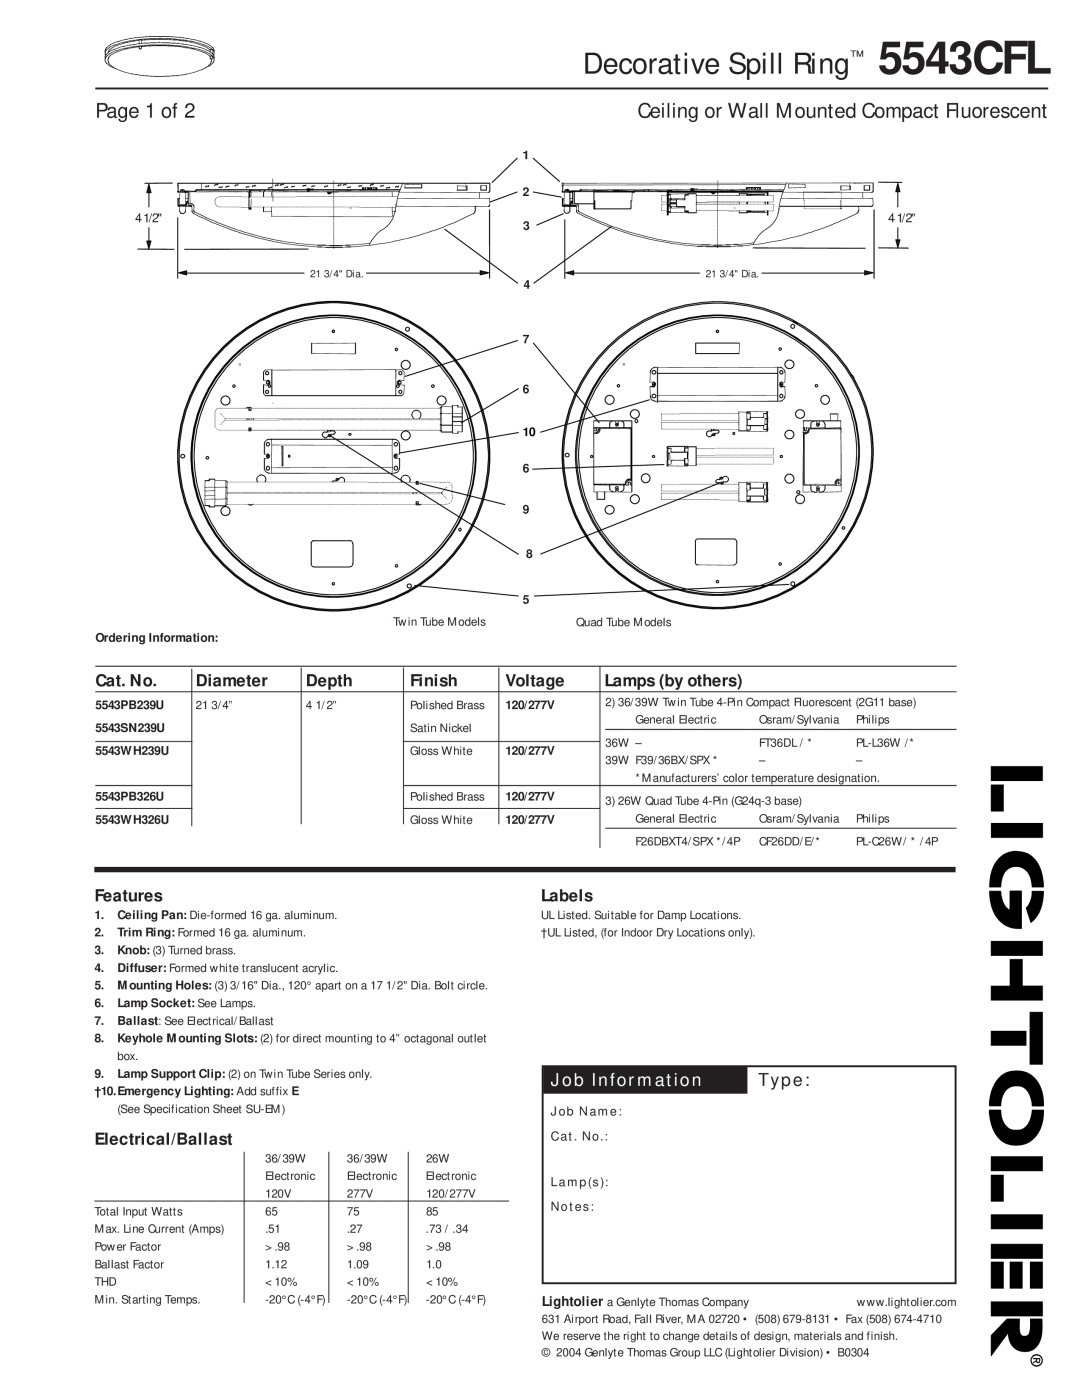 Lightolier specifications Decorative Spill Ring 5543CFL, Page 1 of, Lamps by others, Job Information, Type, Cat. No 